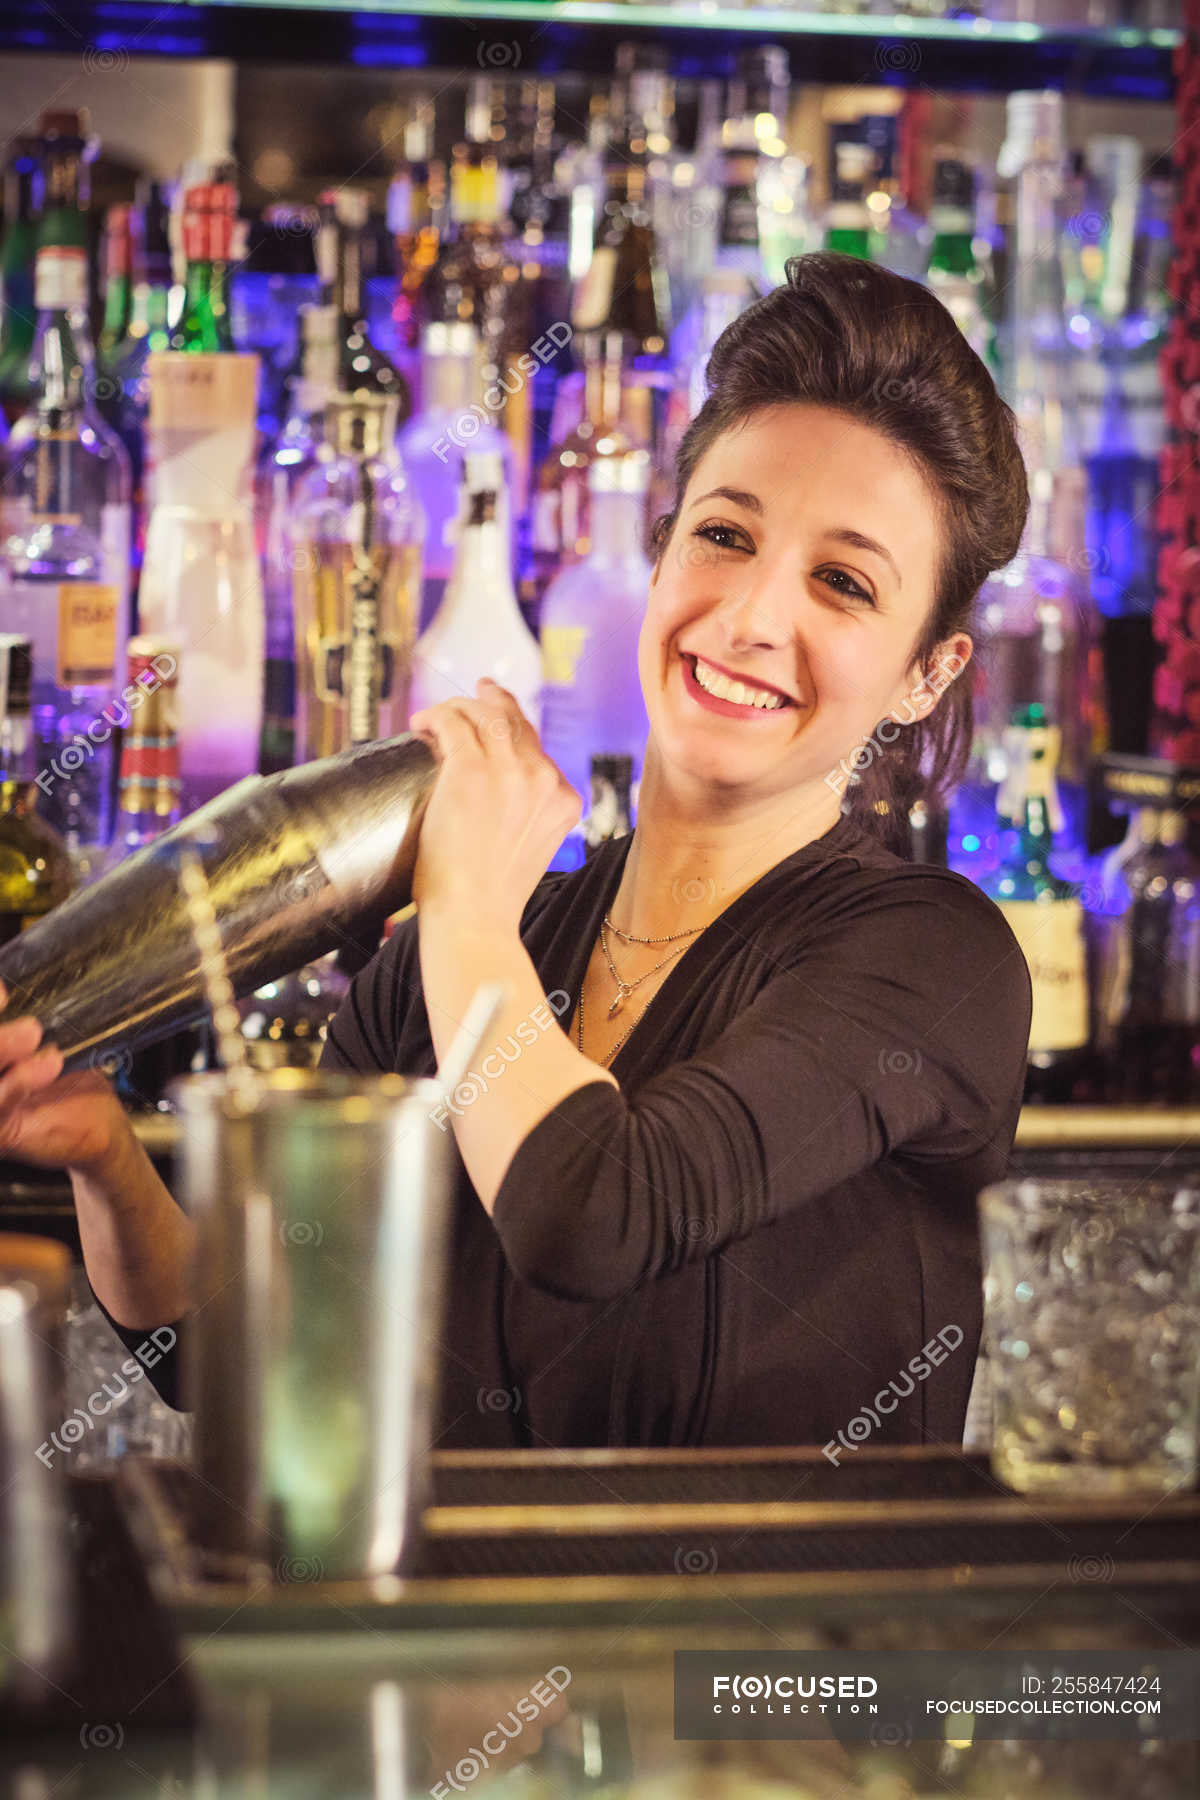 Bartenders need attractive? be do to what should